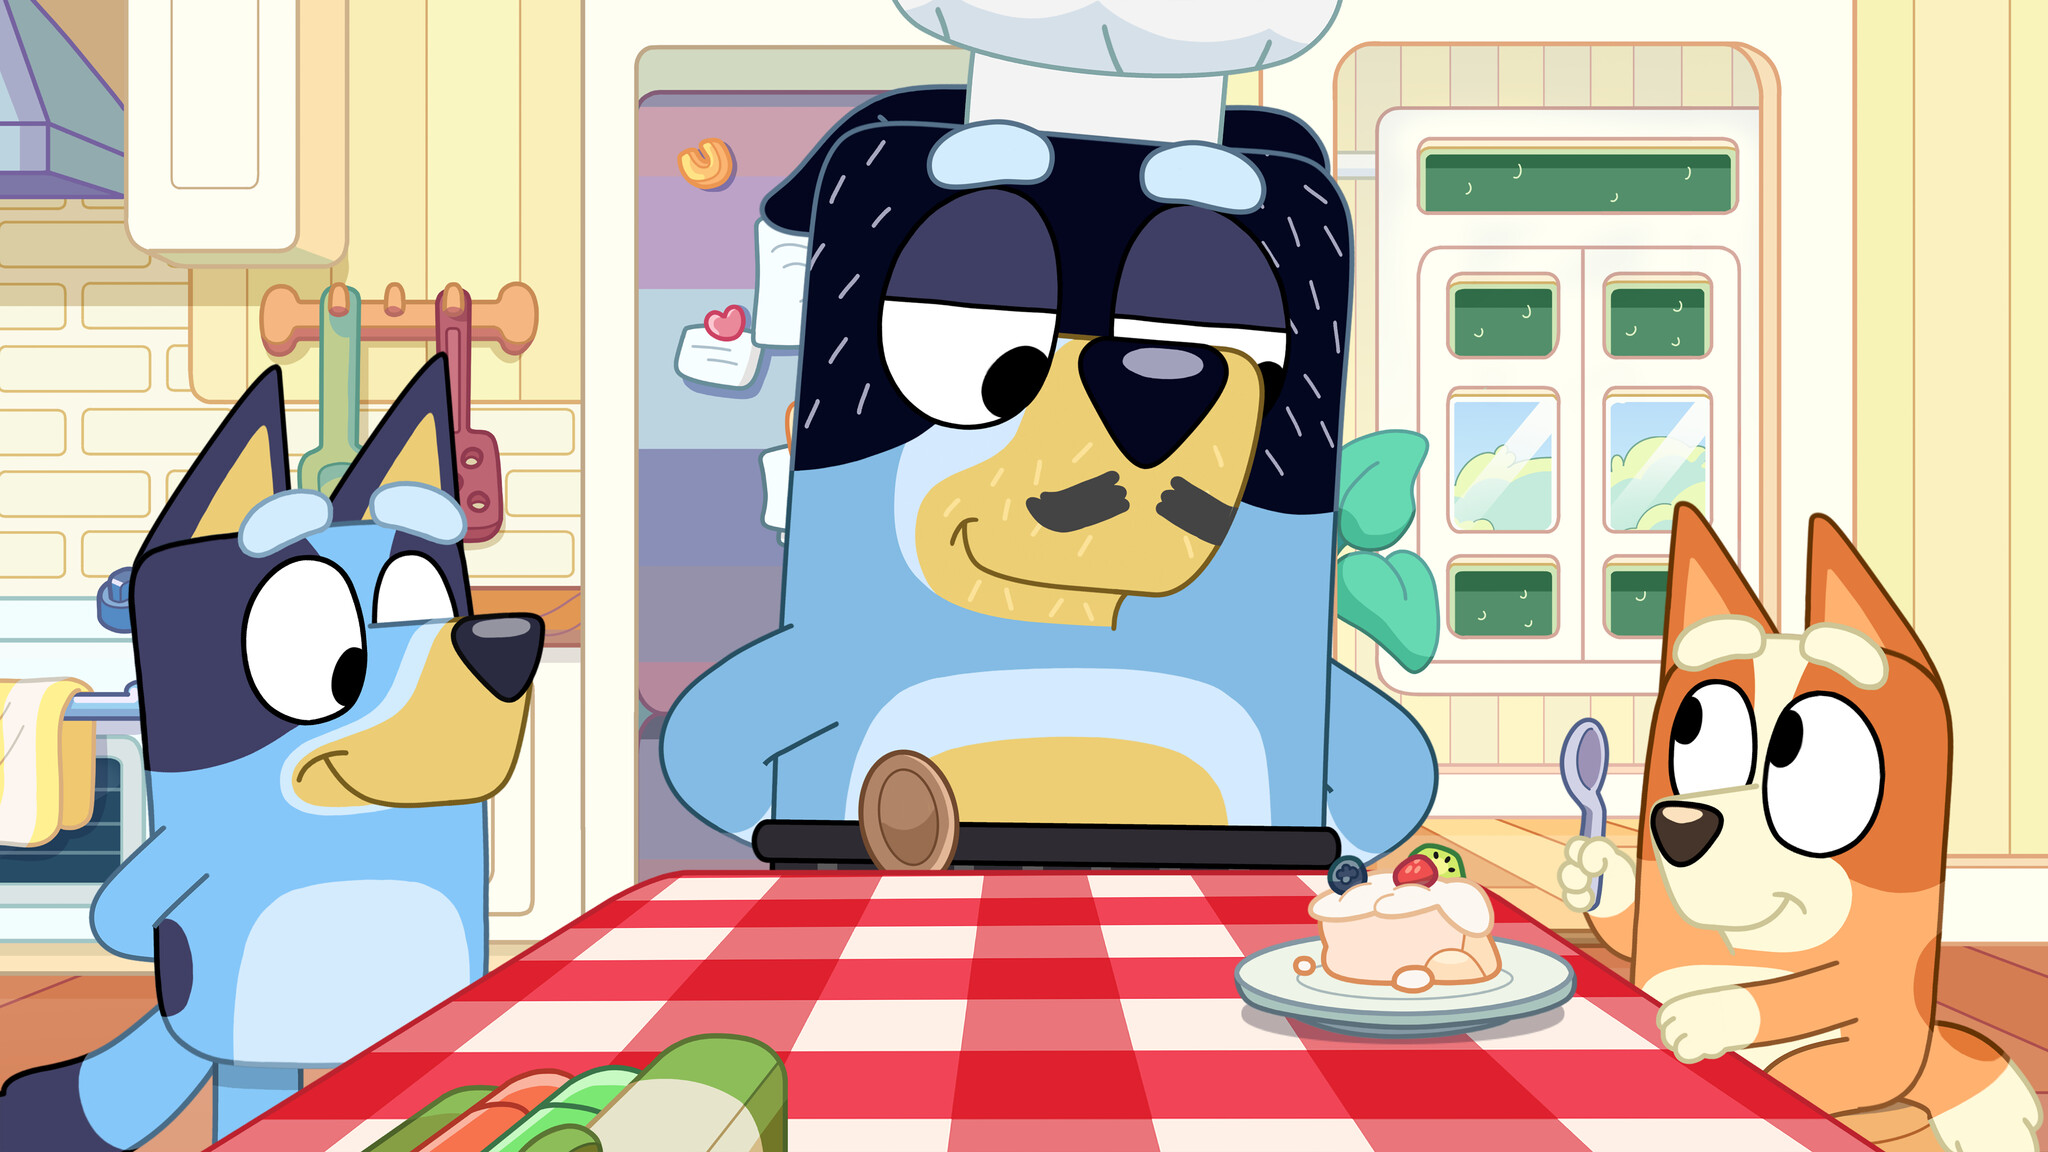 Bandit wears a chef's hat and fake mustache while Bluey and Bingo sit at the kitchen table. Bandit smiles down at Bingo.